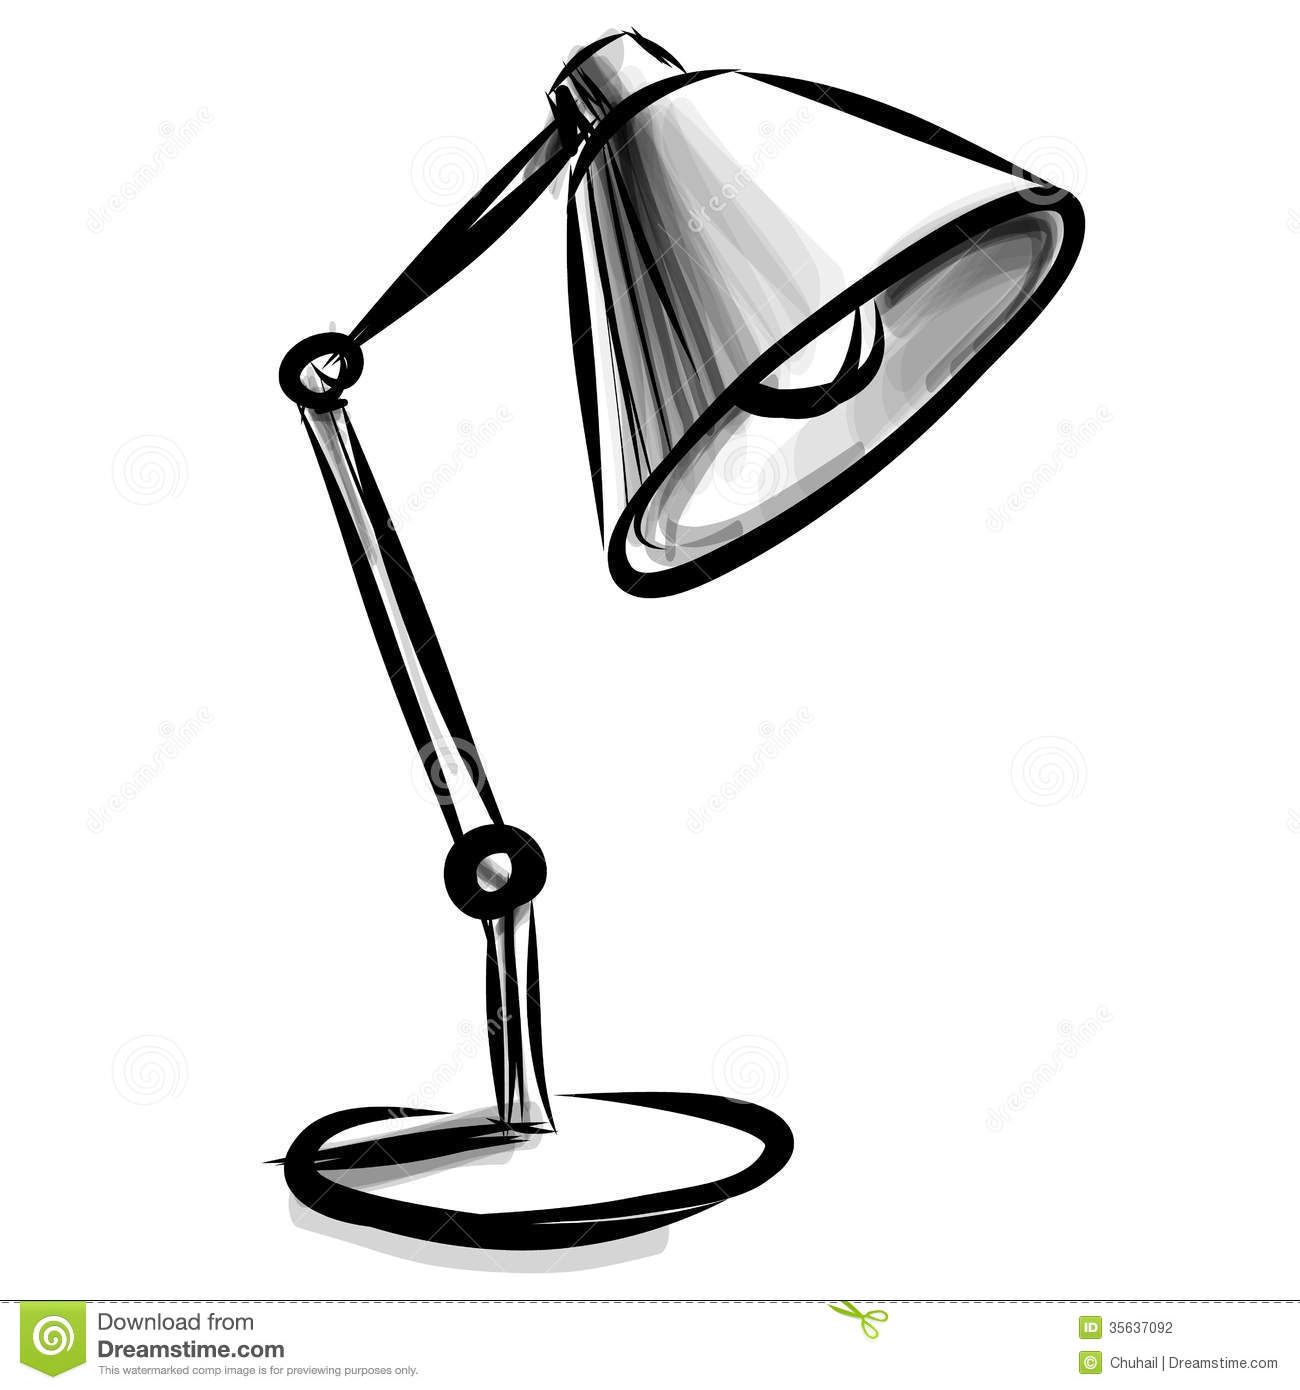 Table Lamp Drawing